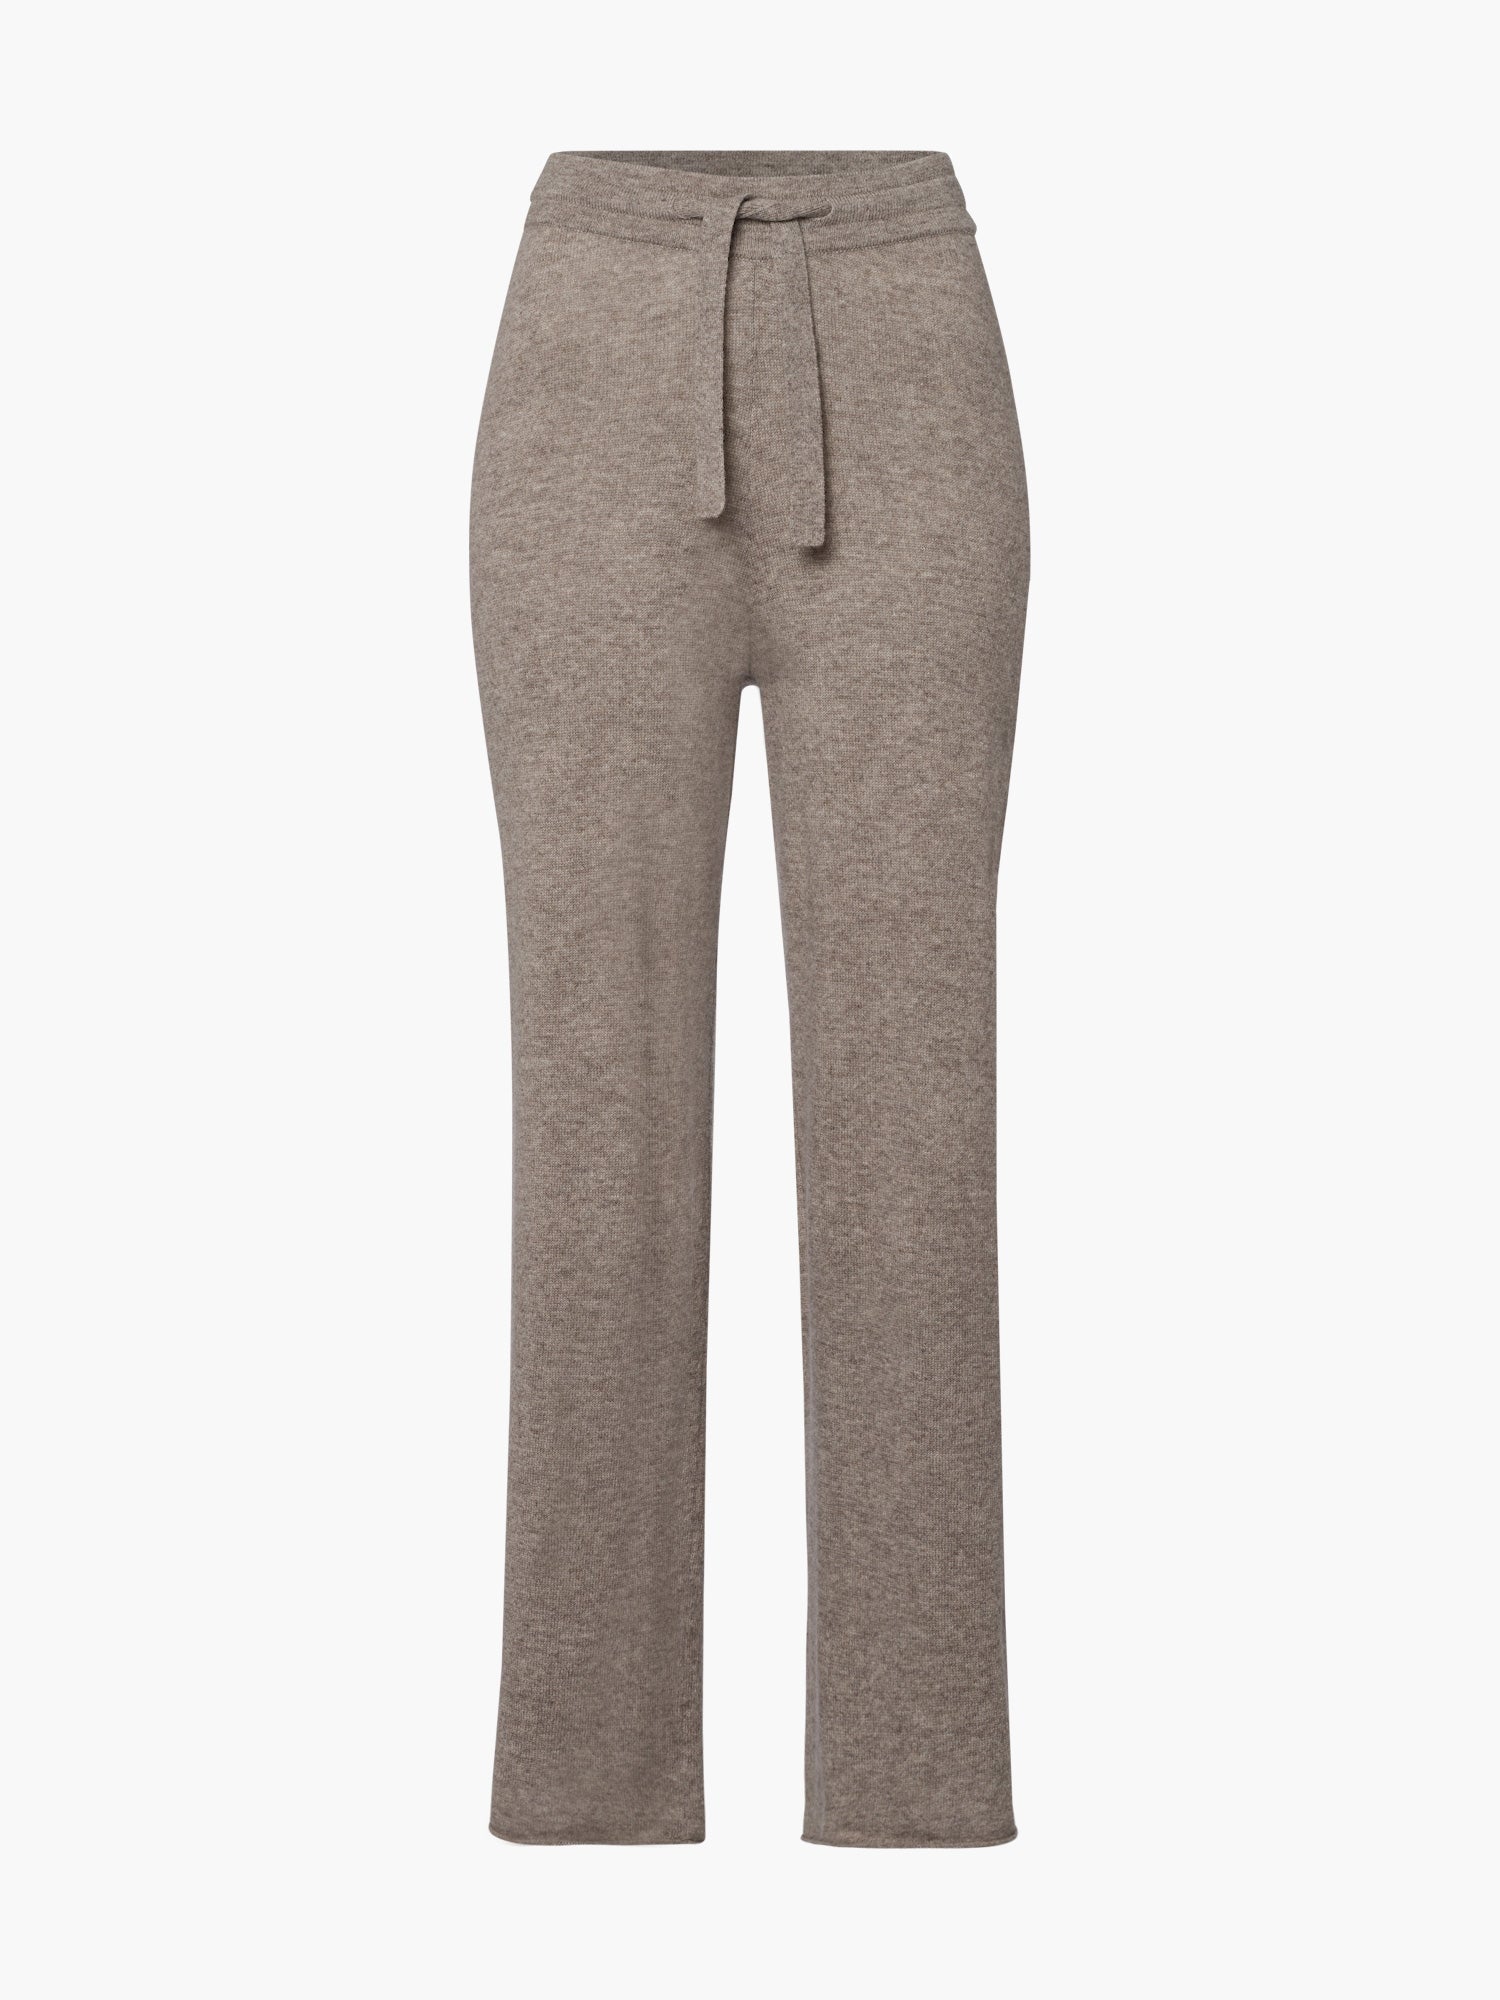 FTC-Cashmere-OUTLET-SALE-Trousers-Hosen-ARCHIVE-COLLECTION_76545694-7e12-48de-a516-aeee9cfb566f.jpg